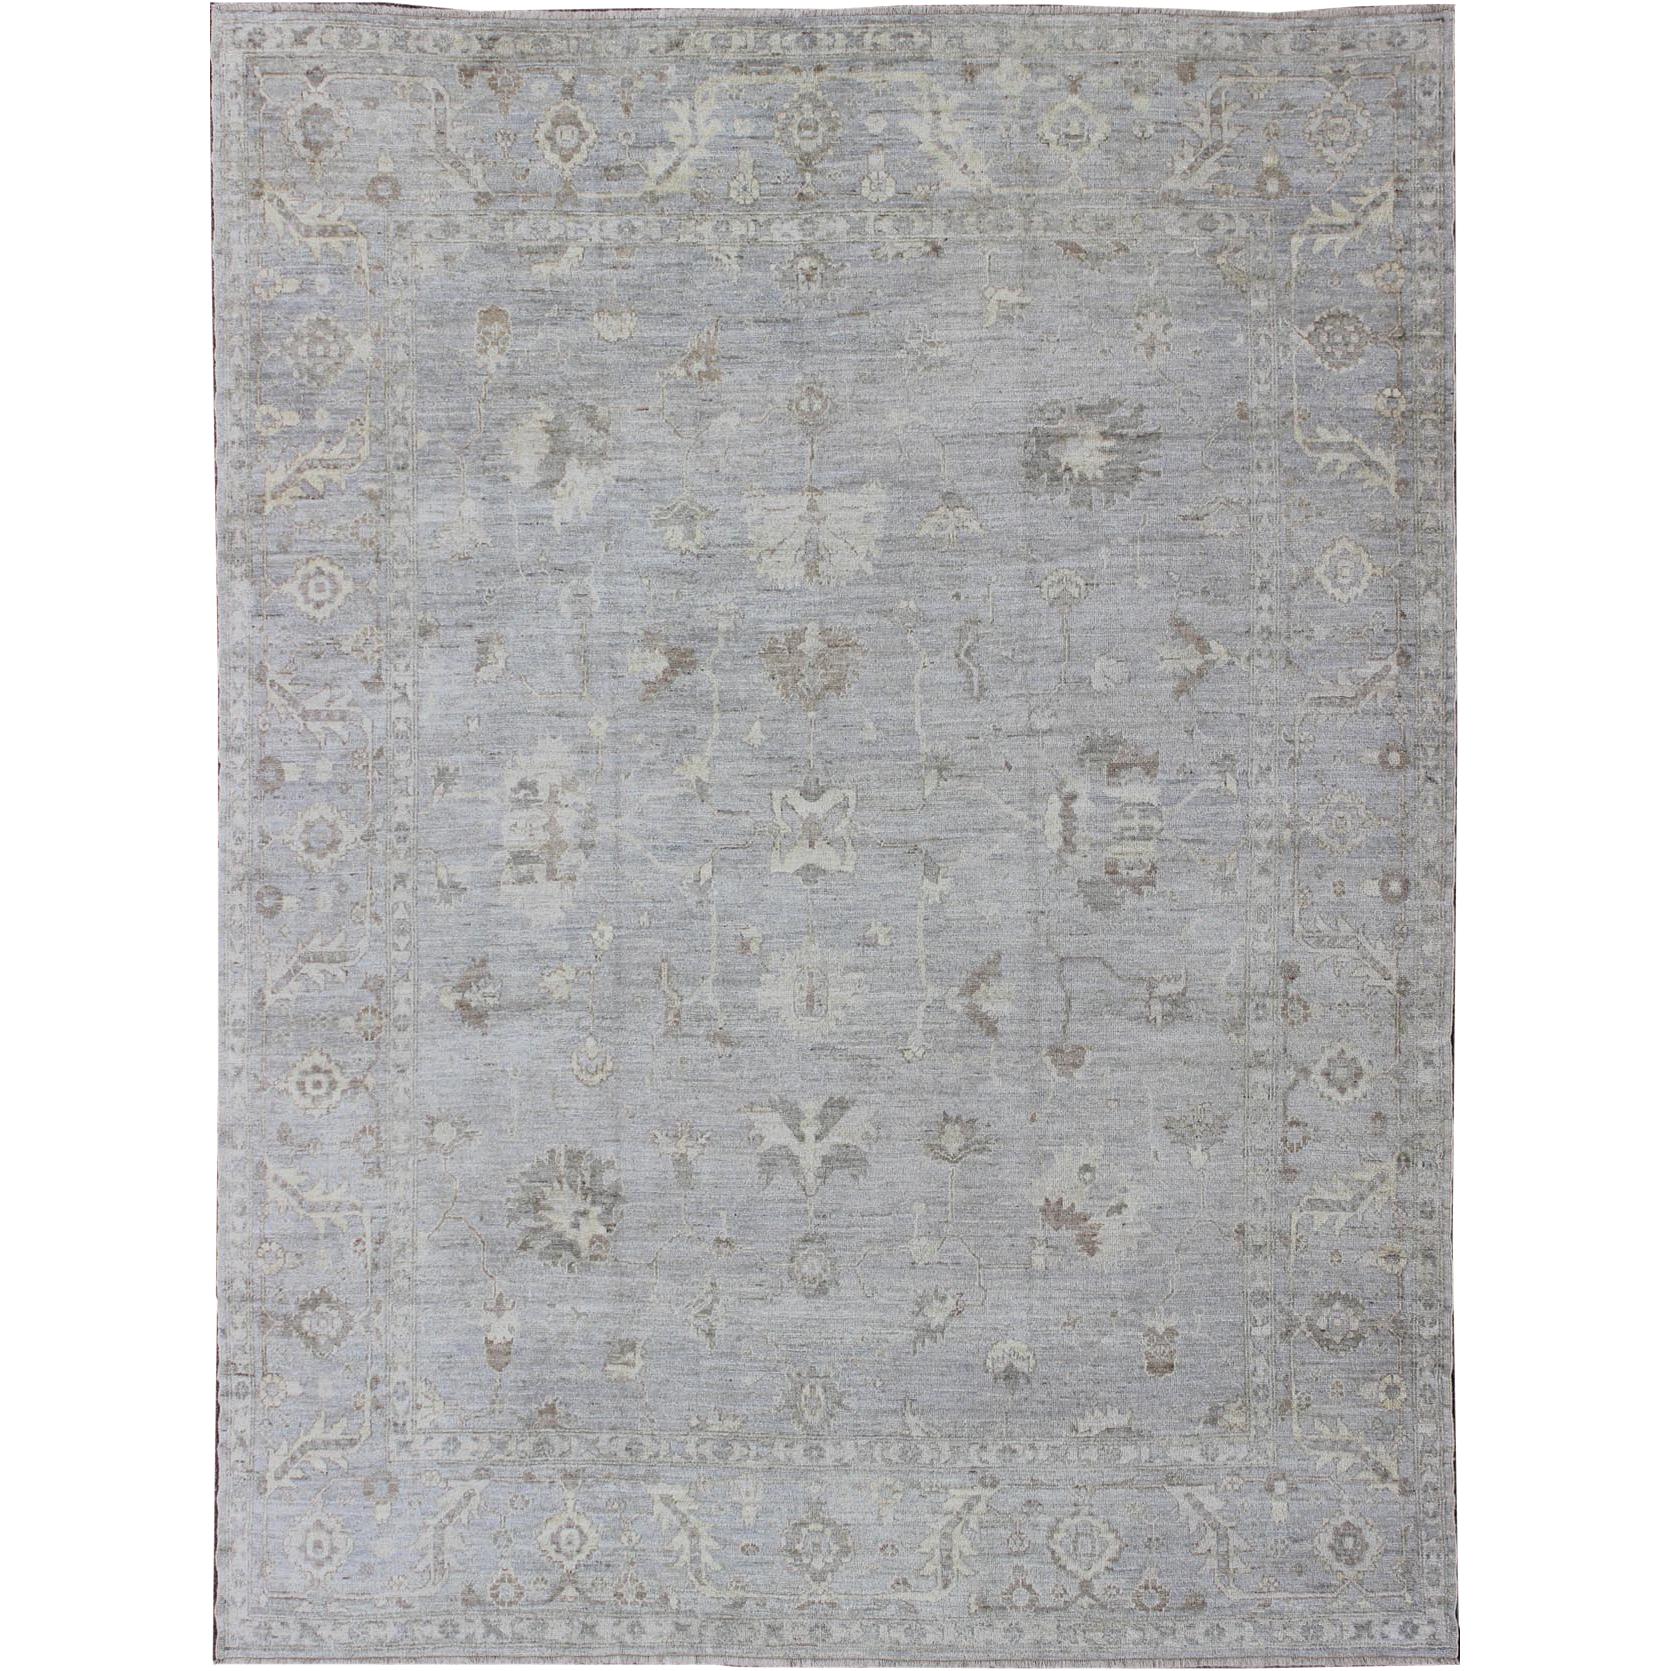 Modern Turkish Oushak Rug with Floral Motifs in Gray, Taupe and ...